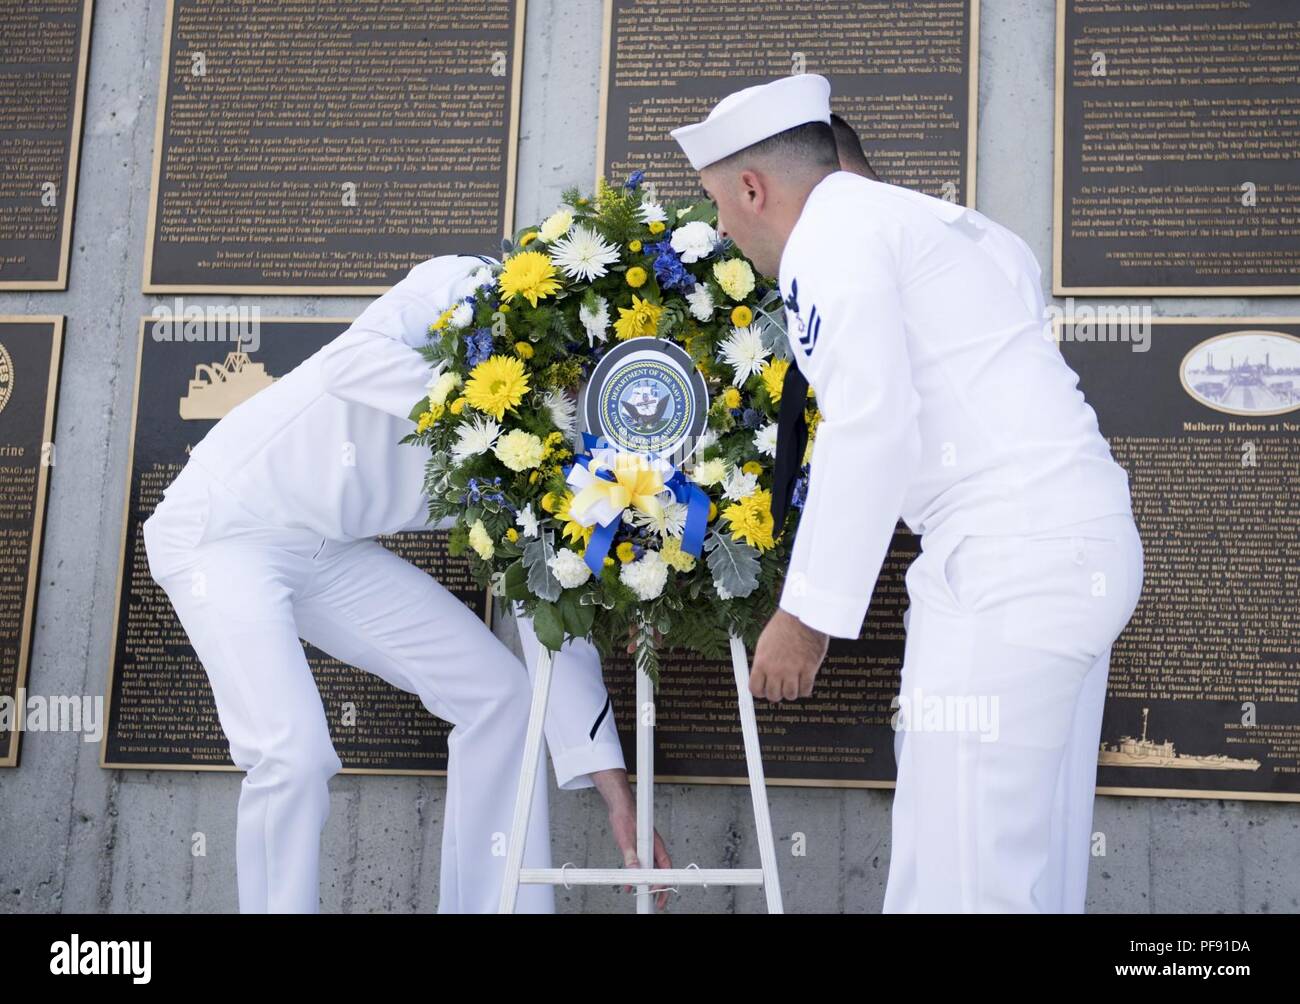 Va.  (June 6, 2018) Sailors assigned to Assault Craft Unit (ACU) 2 lay a wreath during the 74th D-Day commemoration ceremony at the National D-Day Memorial. The Memorial resides in Bedford, Va., the town that suffered the highest per-capita loss of lives in the D-Day invasion over any community in the allied forces. Stock Photo